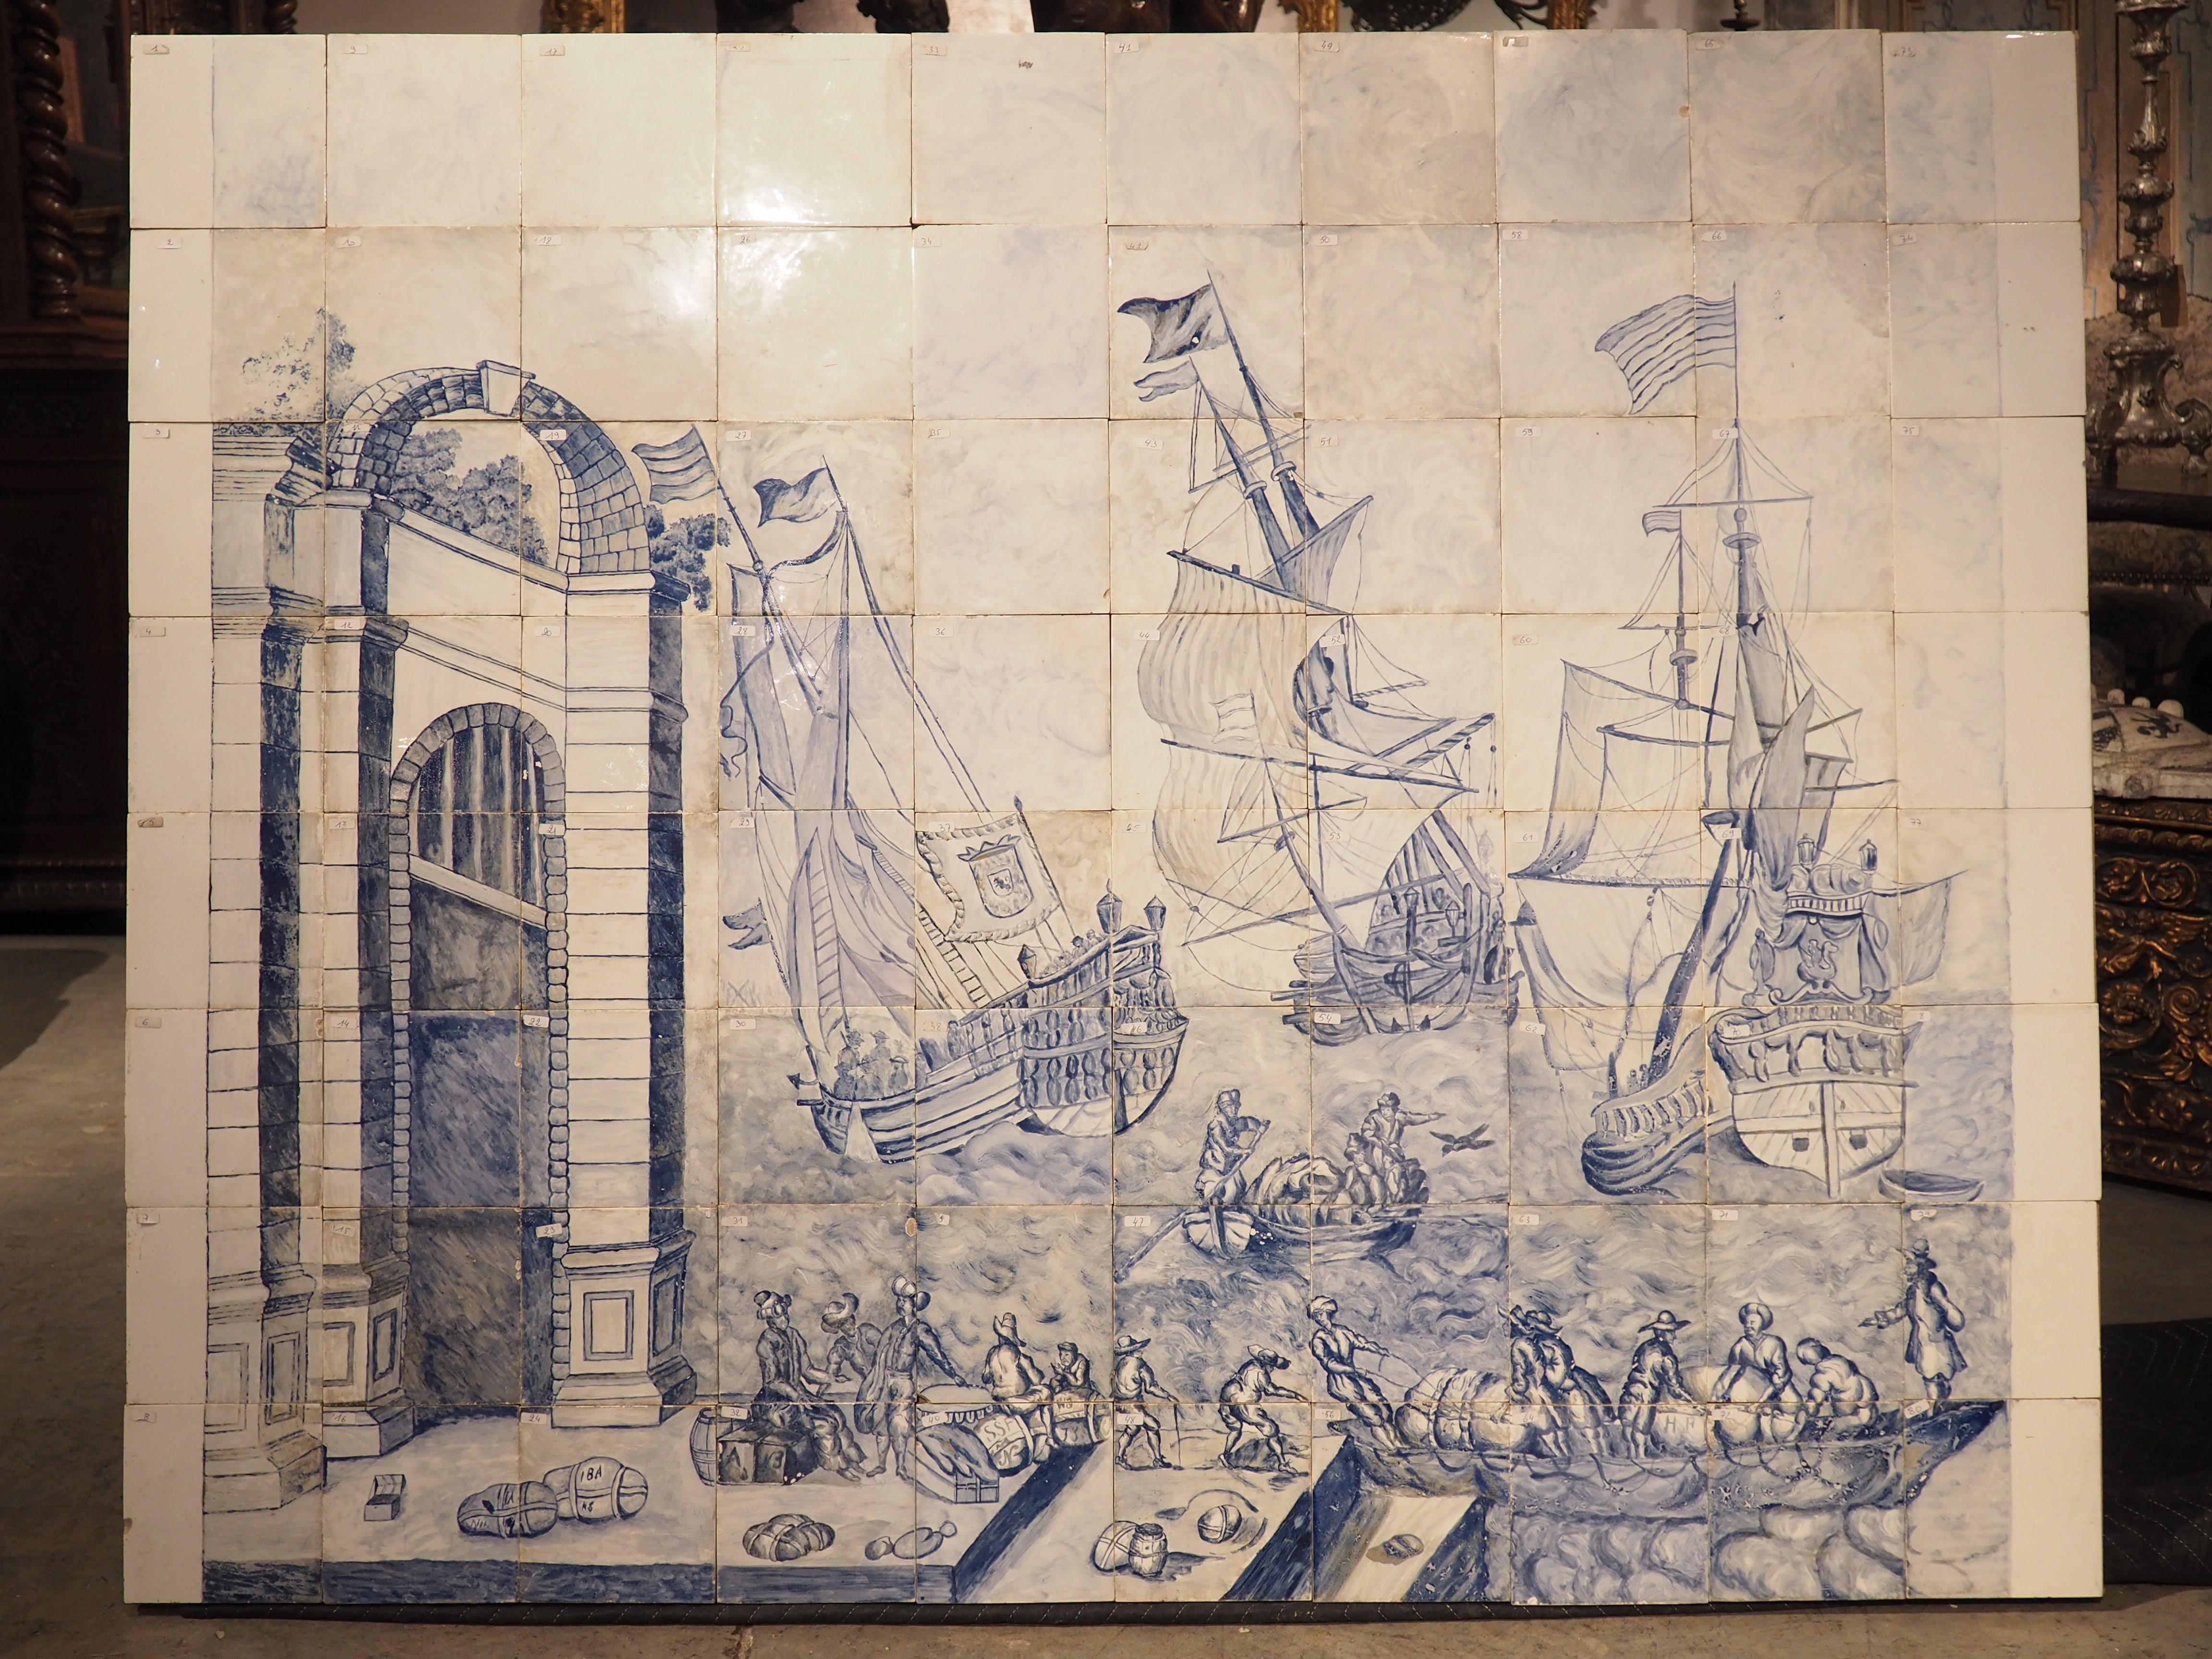 This beautiful blue and white panel consists of 80 individually hand-painted tiles from Portugal, and dates to the 1800s. Measuring nearly 4 feet tall and 5 feet wide, the scene depicted is that of a bustling port scene with ships, choppy waters,